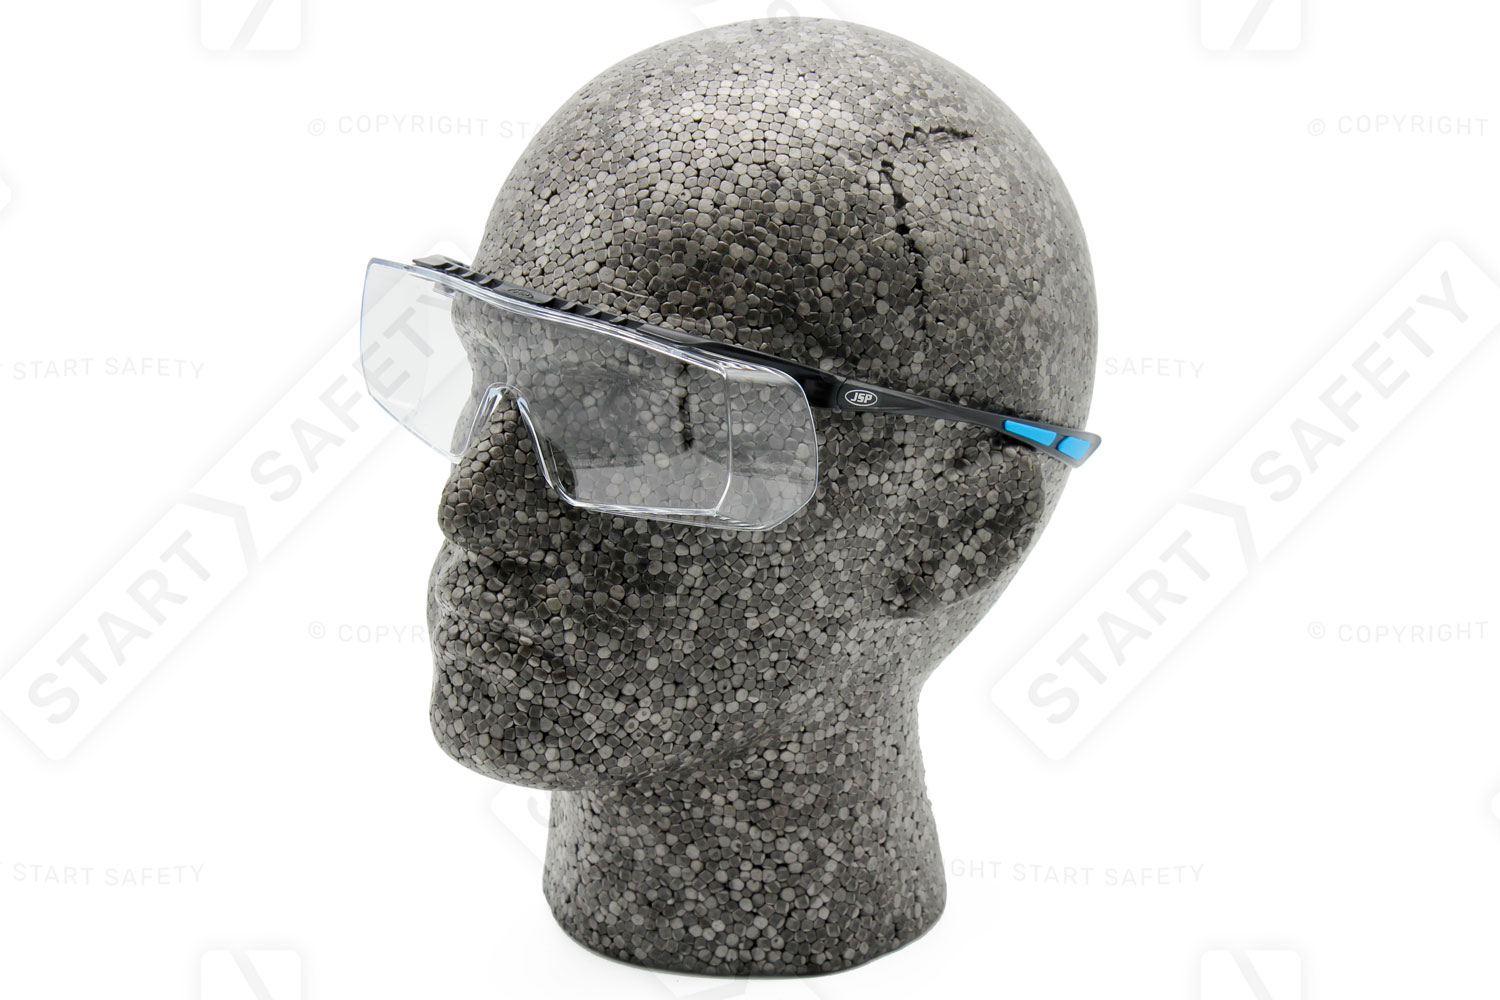 jsp K&N Rated Stealth Coverlite Overspecs on dummy head